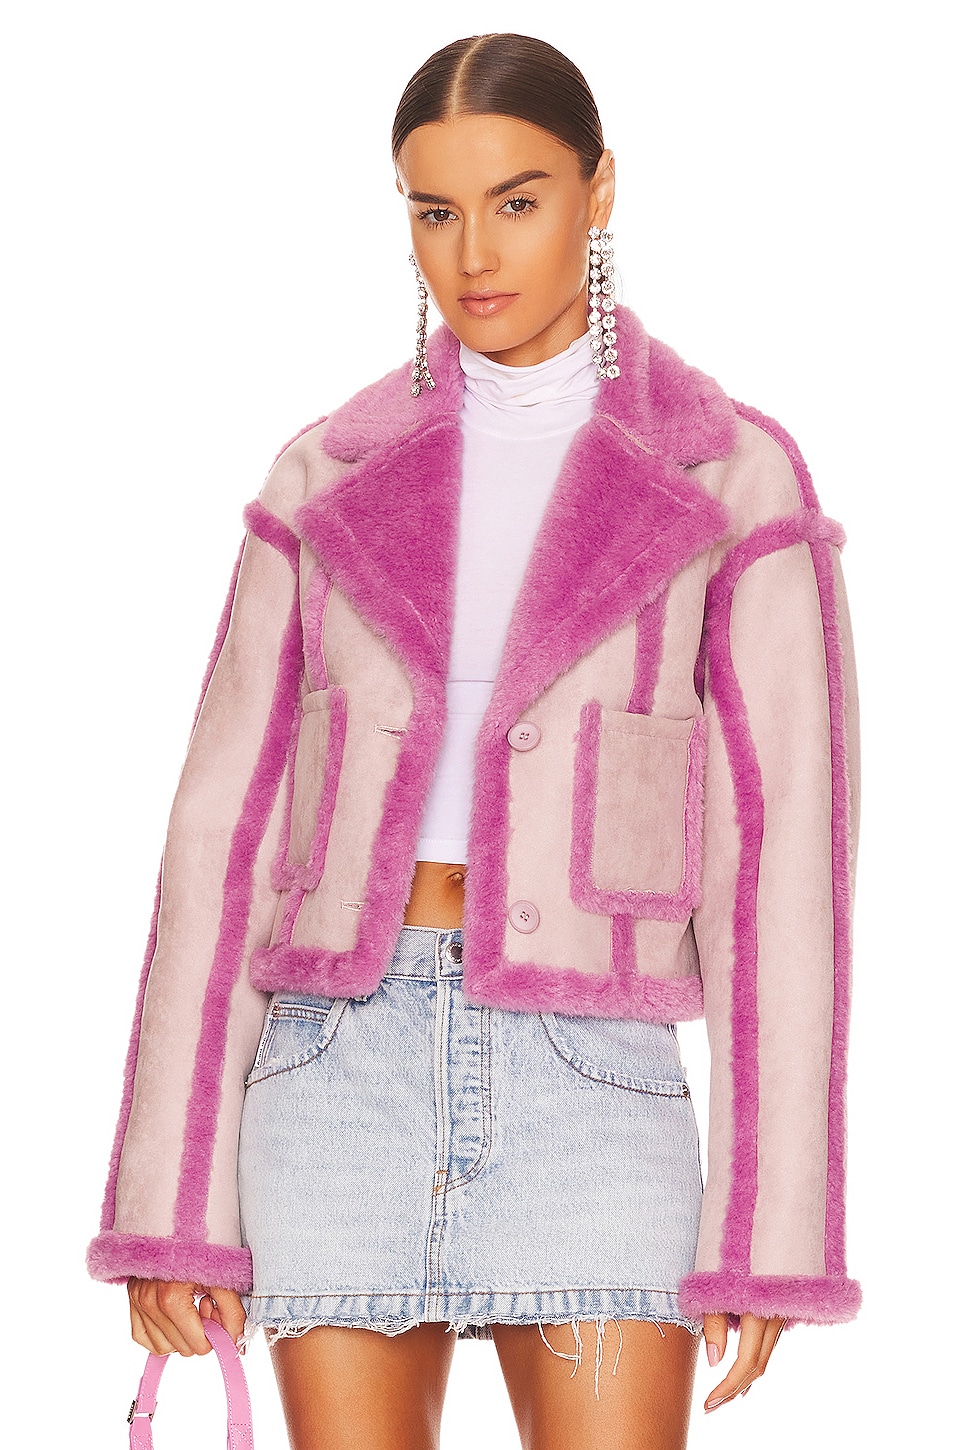 OW Collection Berlin Faux Fur Jacket in Lavender | REVOLVE